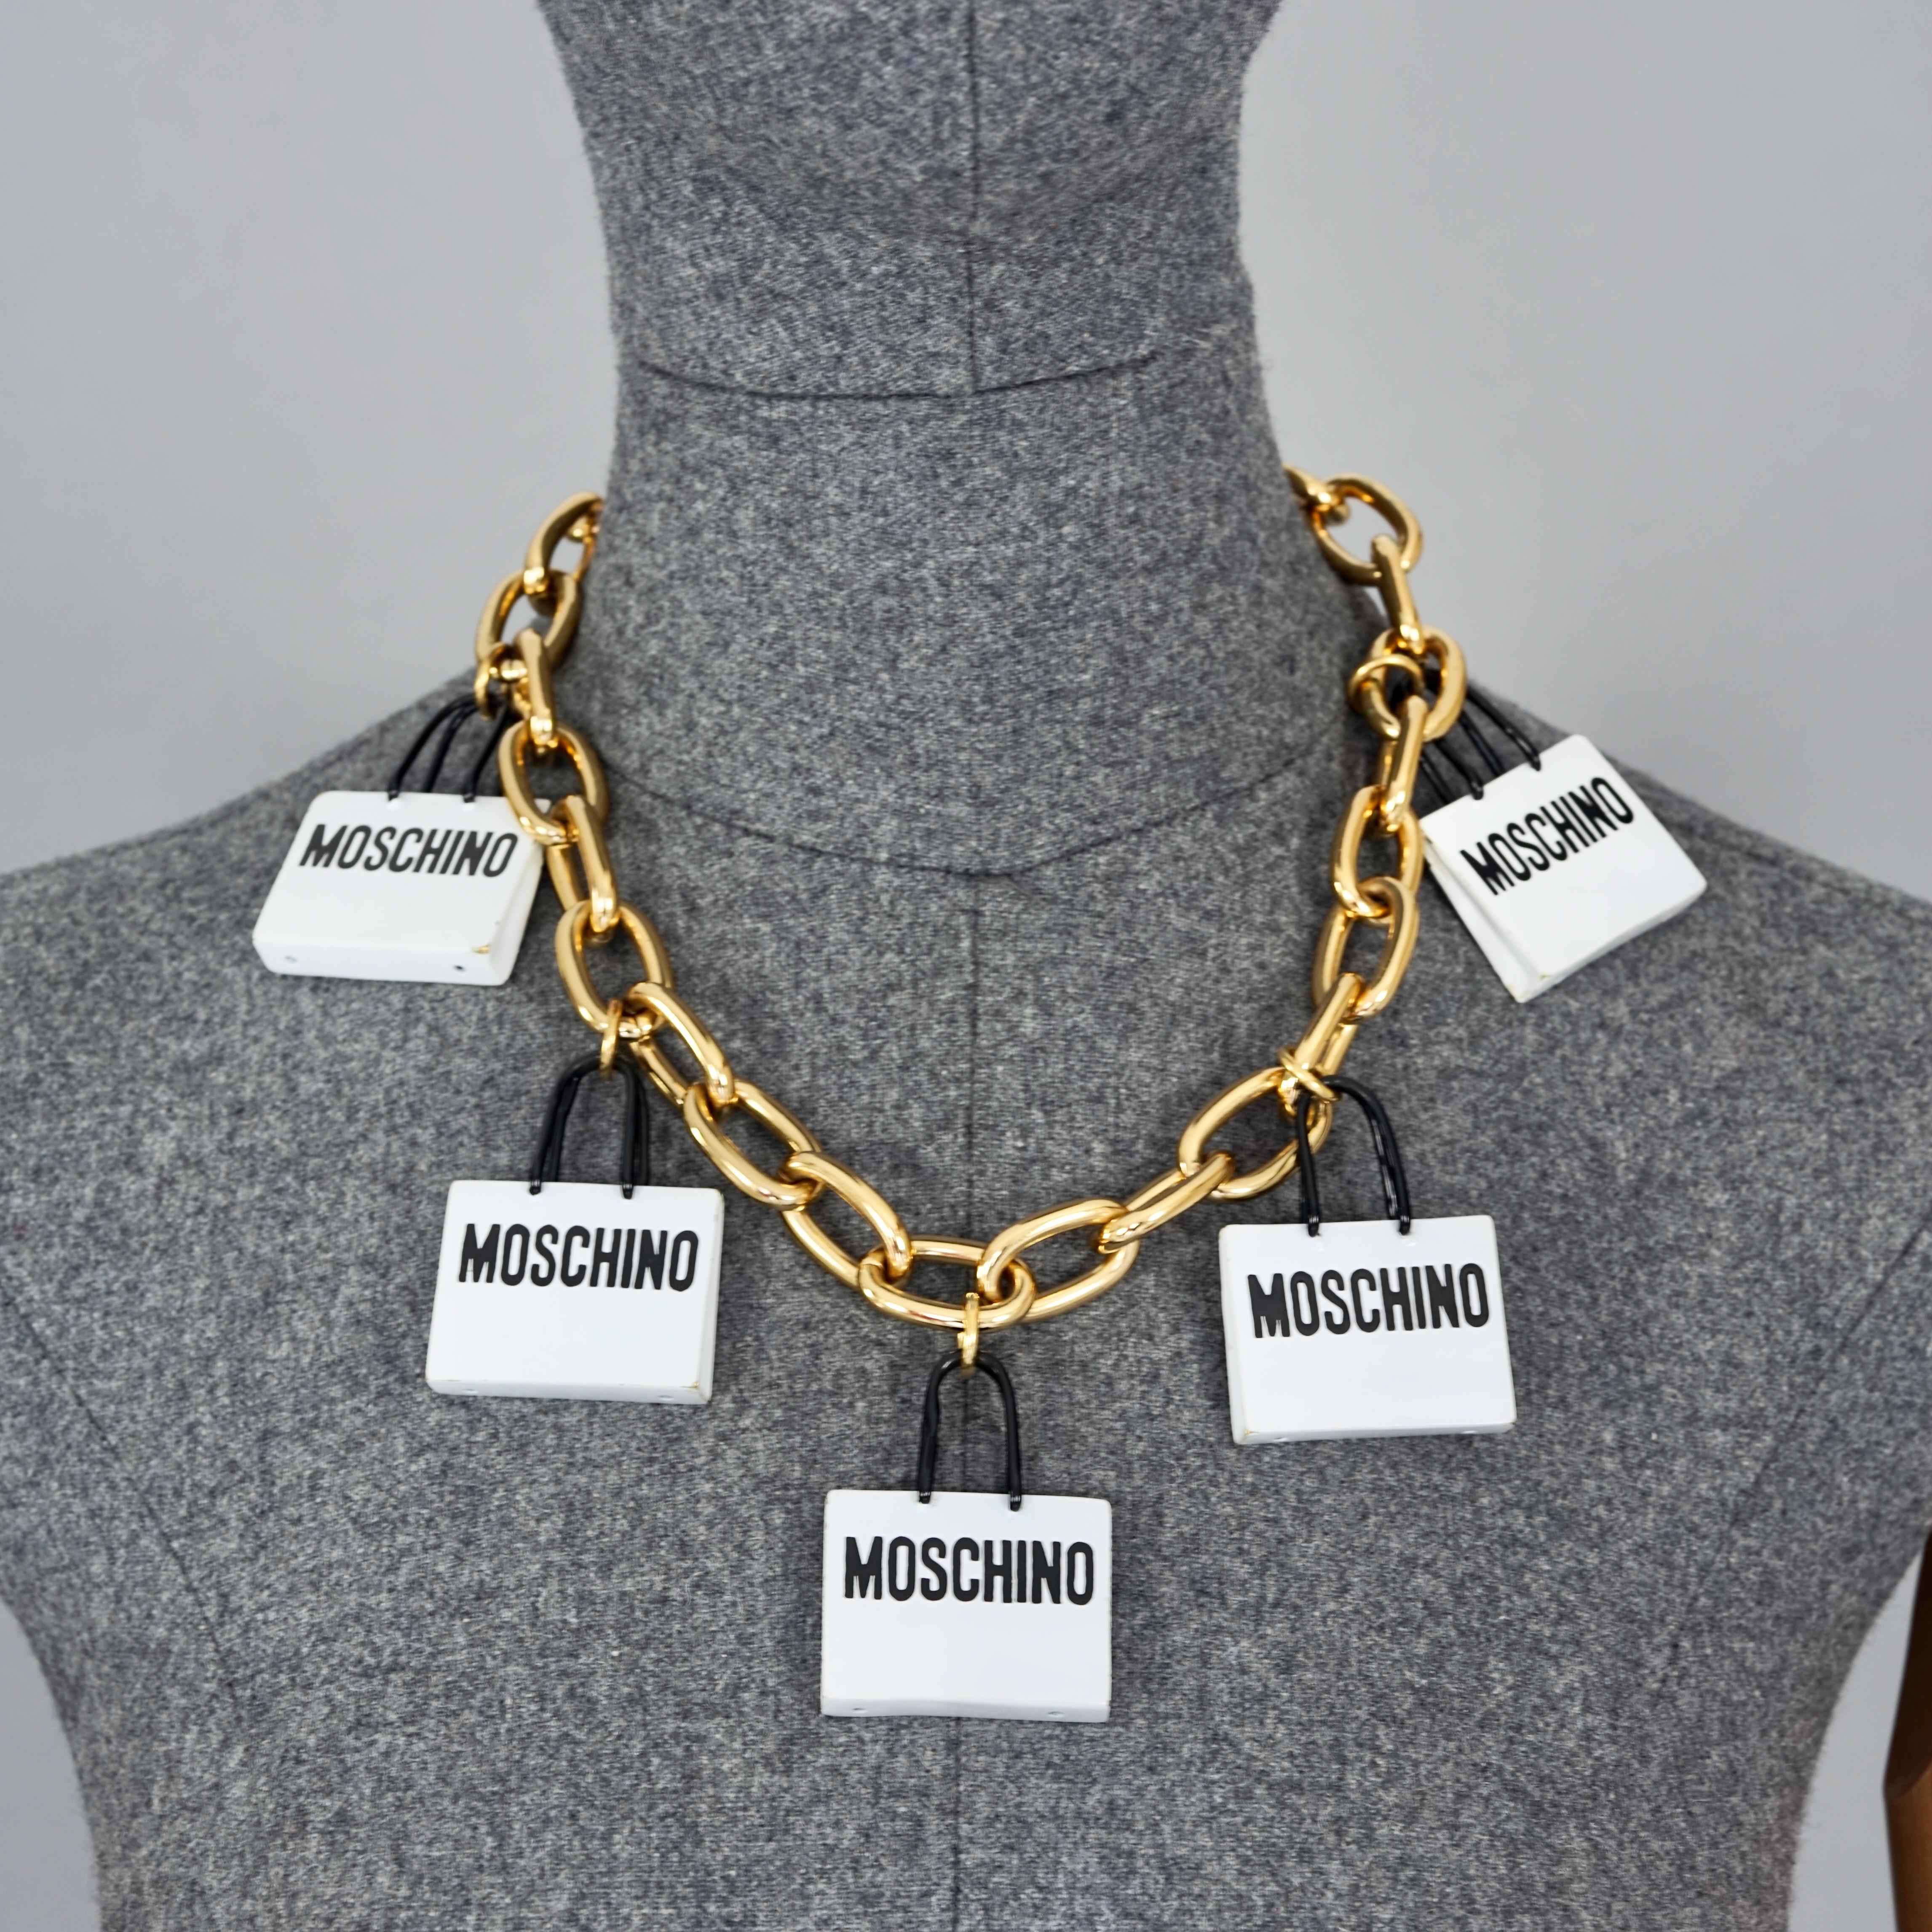 MOSCHINO Shopping Bag Charm Novelty Necklace Resort 2016 Runway

Measurements: 
Height Drop: 2.36 inches (6 cm)
Bags: 1.57 inches X 1.18 inches (4 cm X 3 cm)
Wearable Length: 19.68 inches (50 cm)

Features:
- 100% Authentic MOSCHINO COUTURE.
- Chain